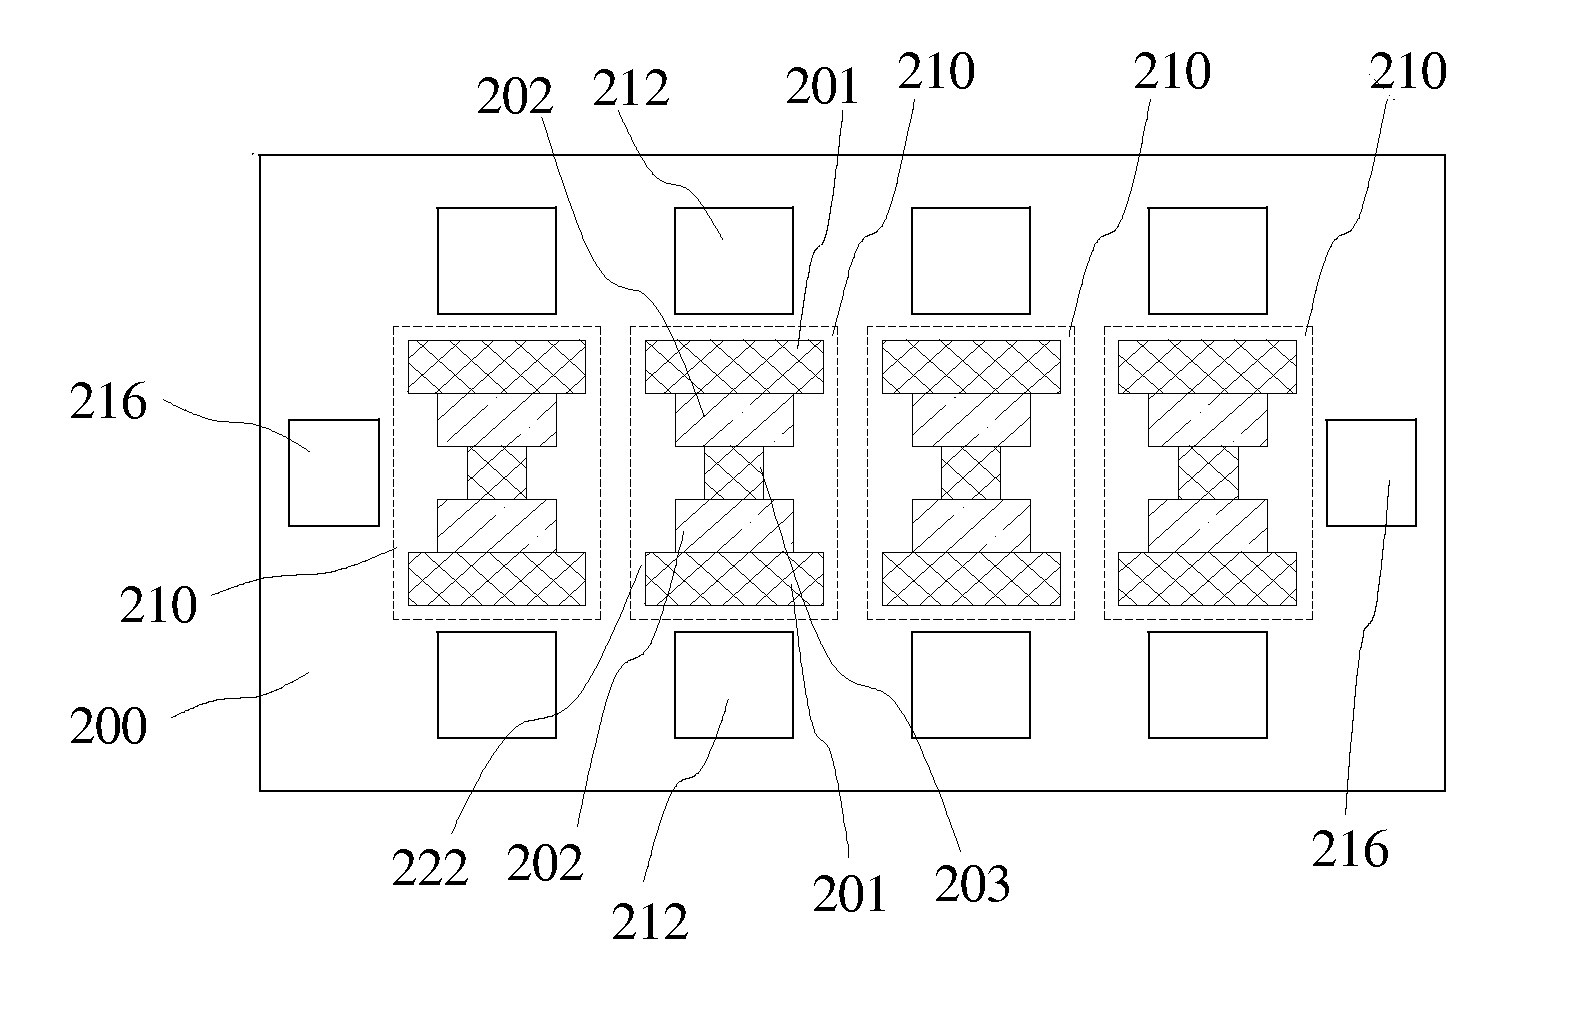 Area reduction for die-scale surface mount package chips